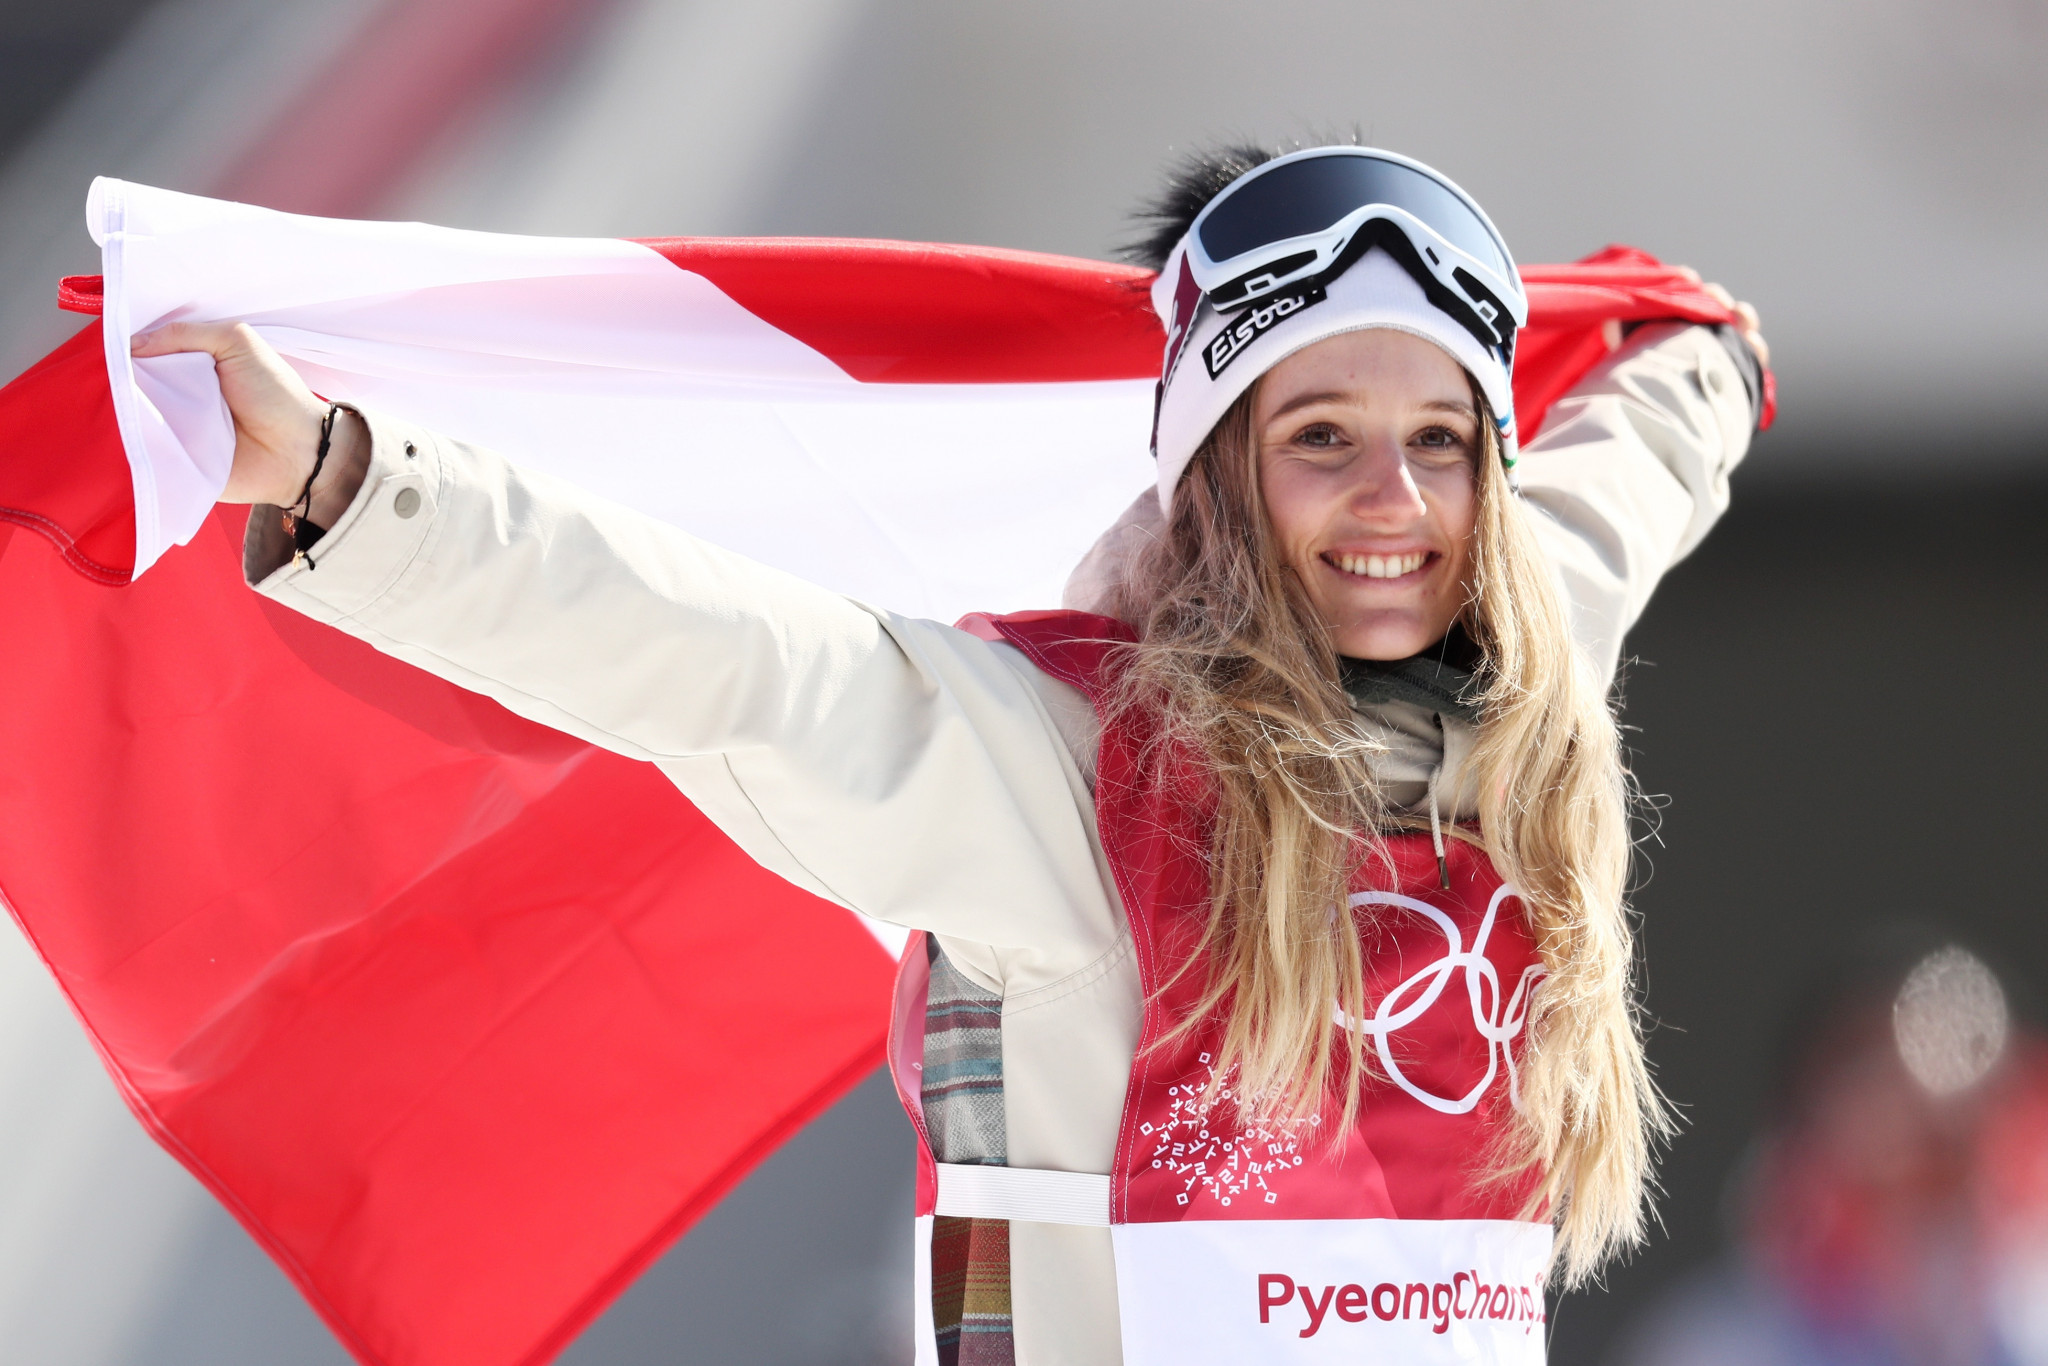 Austria’s Anna Gasser won the first-ever Olympic snowboarding big air gold medal today after coming out on top in the women’s event at Pyeongchang 2018 ©Getty Images